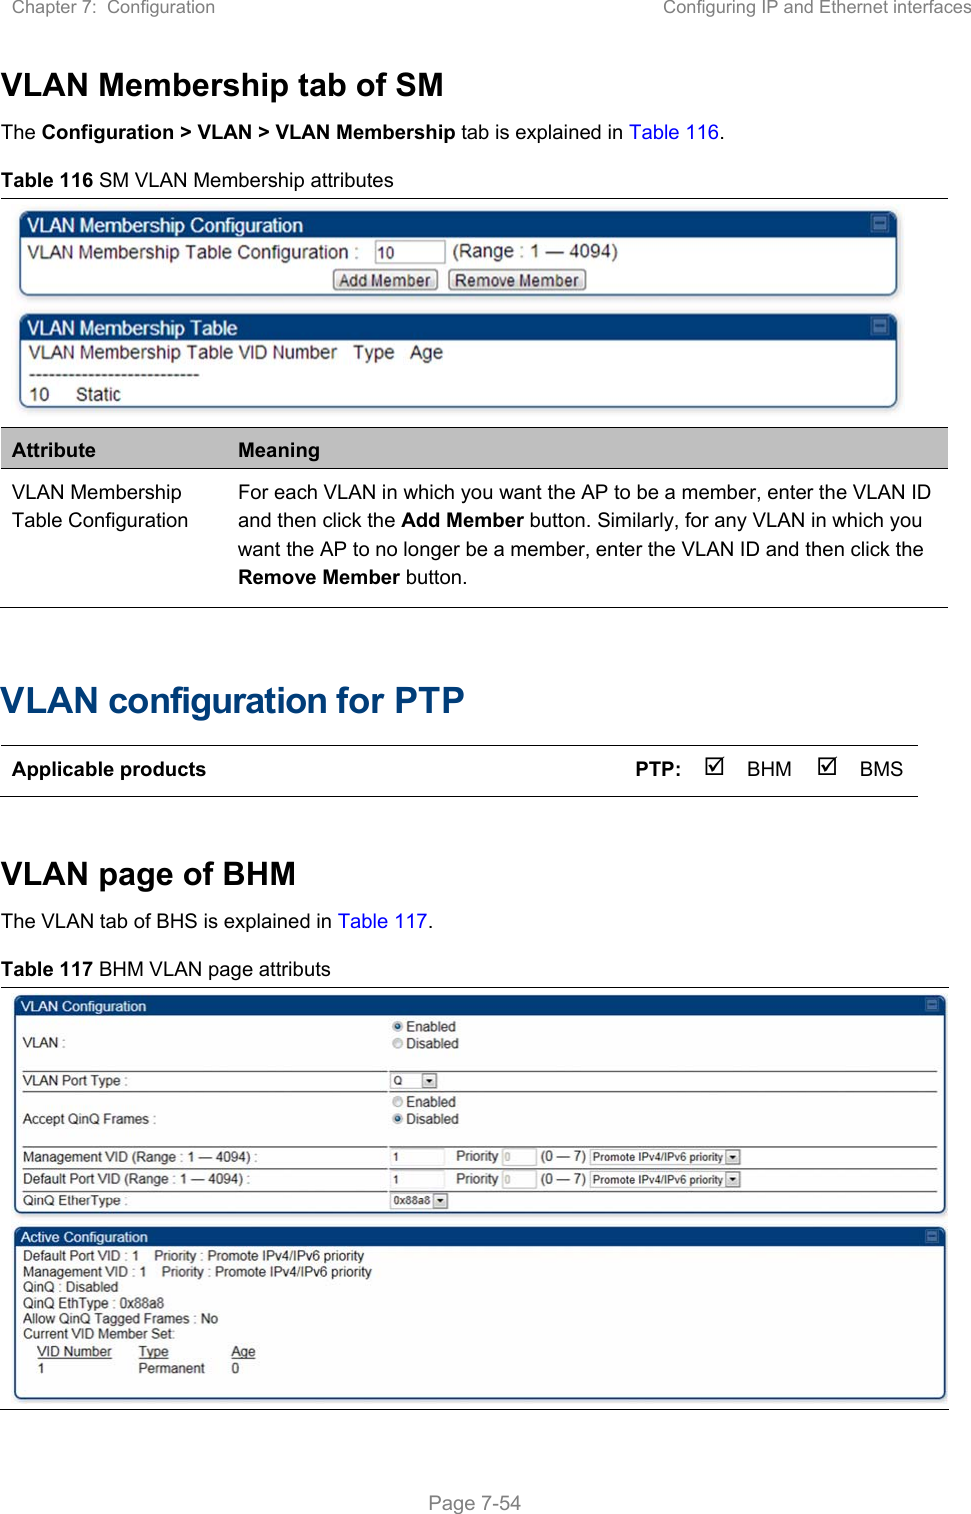 Chapter 7:  Configuration  Configuring IP and Ethernet interfaces   Page 7-54 VLAN Membership tab of SM The Configuration &gt; VLAN &gt; VLAN Membership tab is explained in Table 116. Table 116 SM VLAN Membership attributes  Attribute  Meaning VLAN Membership Table Configuration For each VLAN in which you want the AP to be a member, enter the VLAN ID and then click the Add Member button. Similarly, for any VLAN in which you want the AP to no longer be a member, enter the VLAN ID and then click the Remove Member button.  VLAN configuration for PTP Applicable products       PTP:BHM  BMS  VLAN page of BHM The VLAN tab of BHS is explained in Table 117. Table 117 BHM VLAN page attributs 